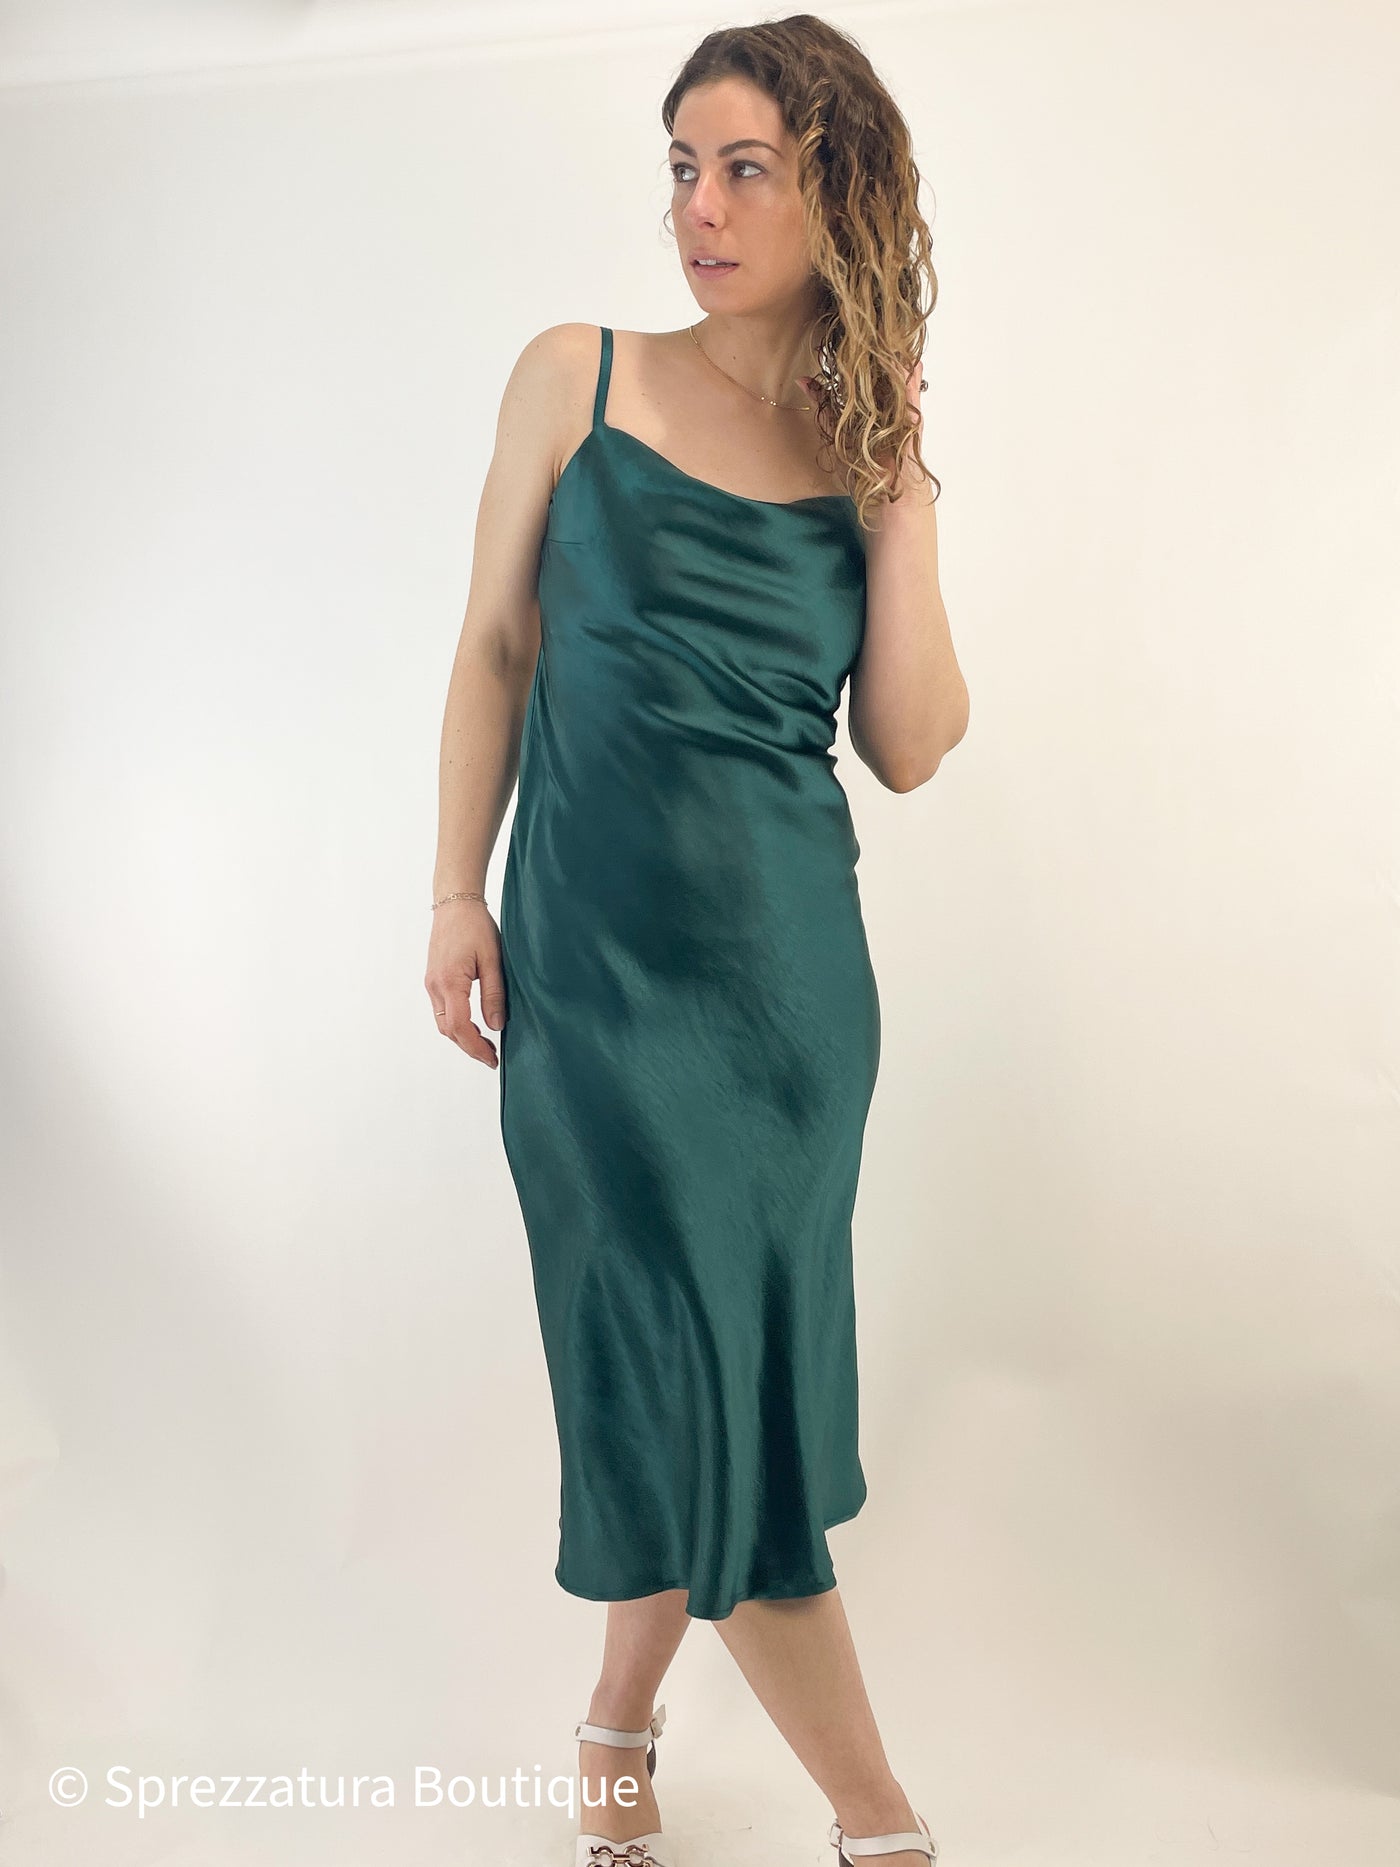 satin slip dress with open criss cross back and cowl neck front. emerald green chic perfect for any special event or wedding. midi length satin adjustable straps